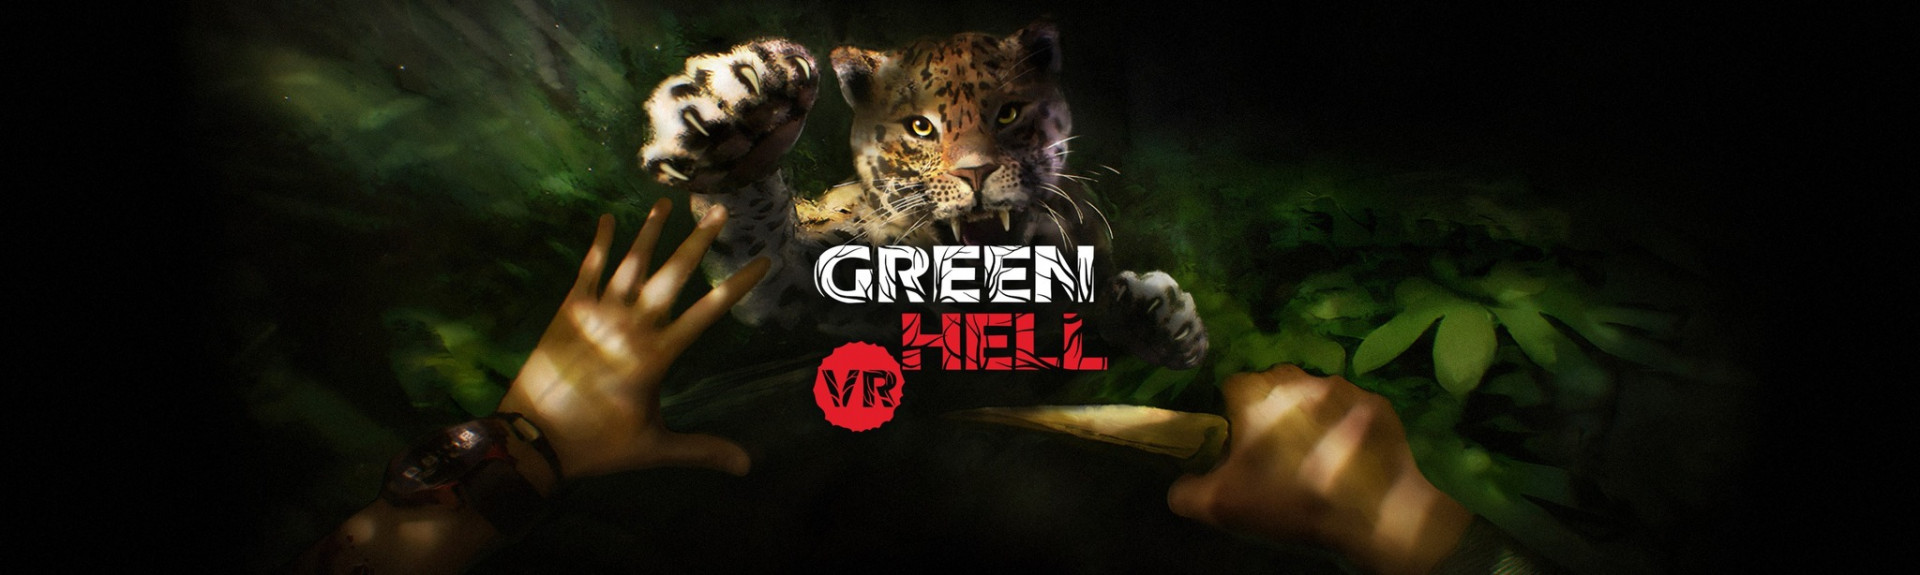 Green Hell VR: ANÁLISIS QUEST 2